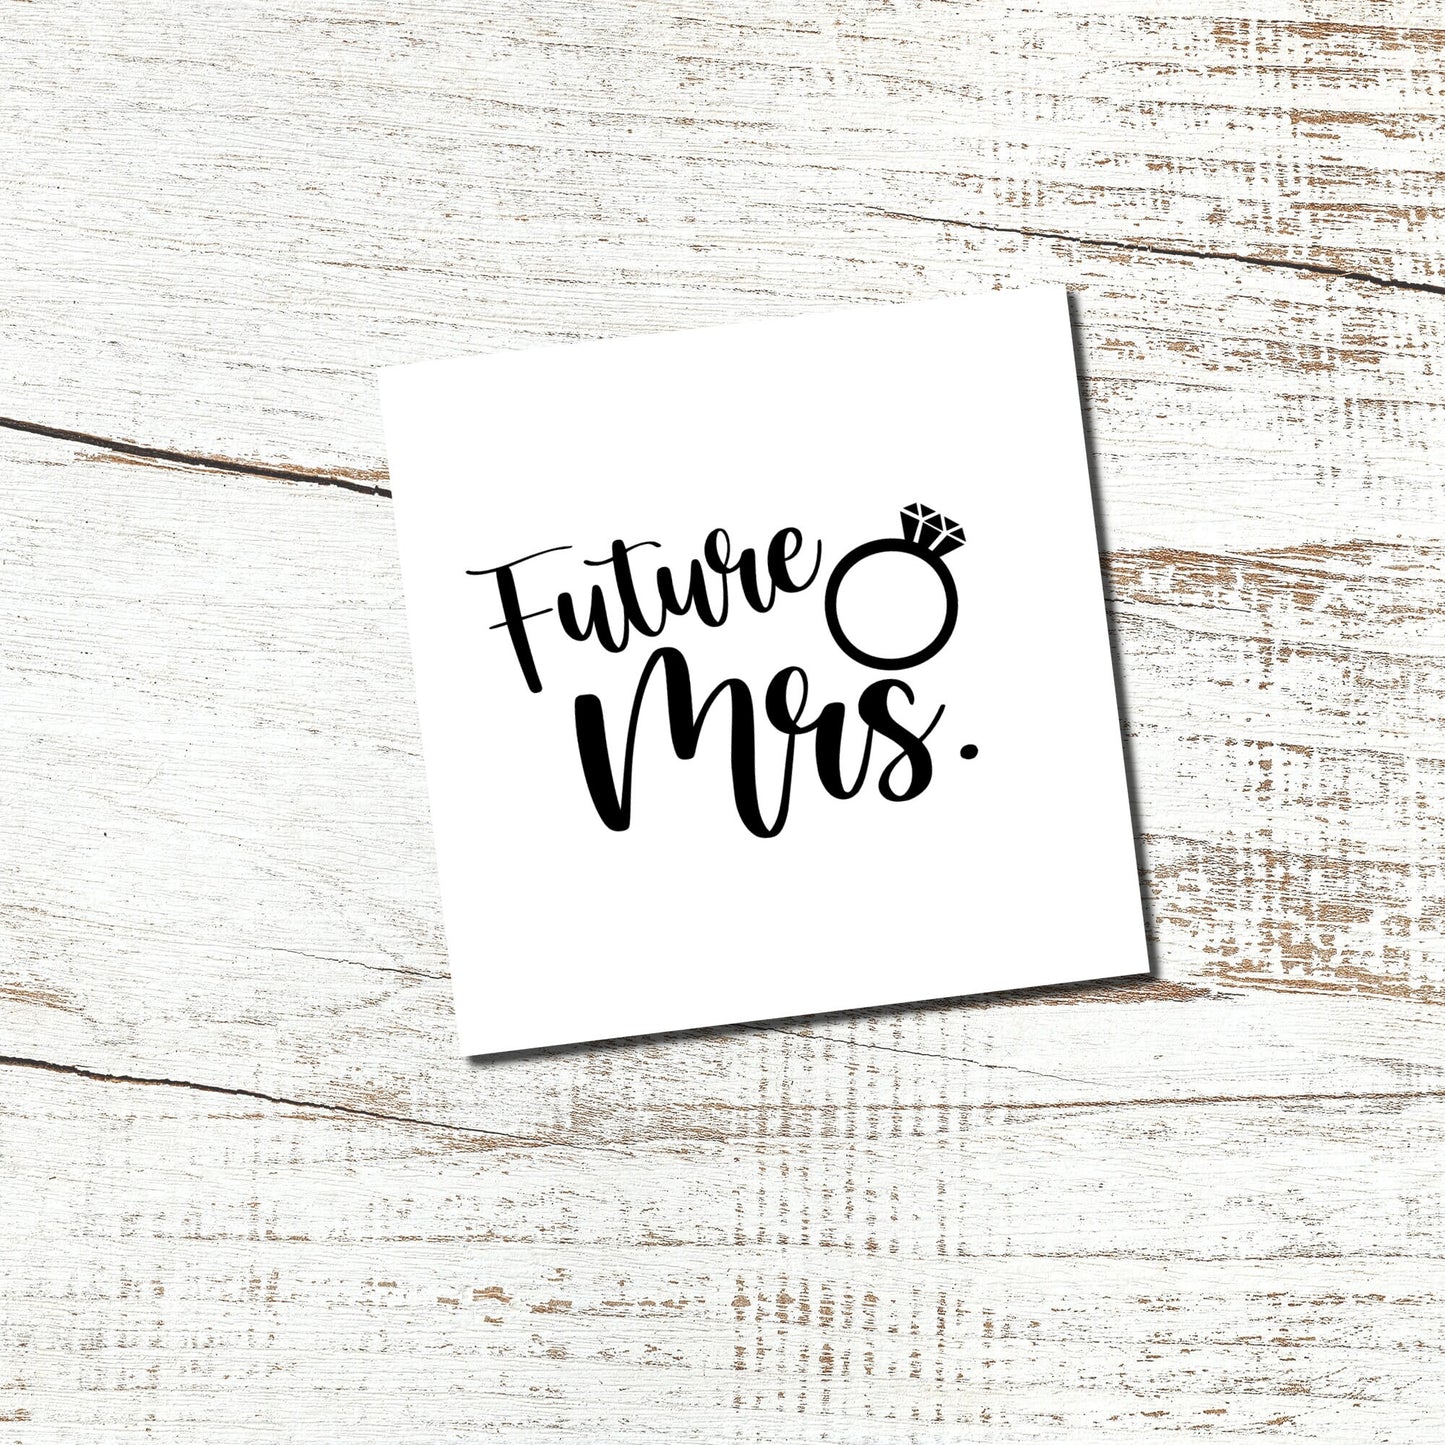 Future Mrs. Engagement Vinyl Decal - Car Decal, Wall Decal, Laptop Decal, Silhouette Decal, Cup Decal, Tumbler Decal, Wine Glass Decal